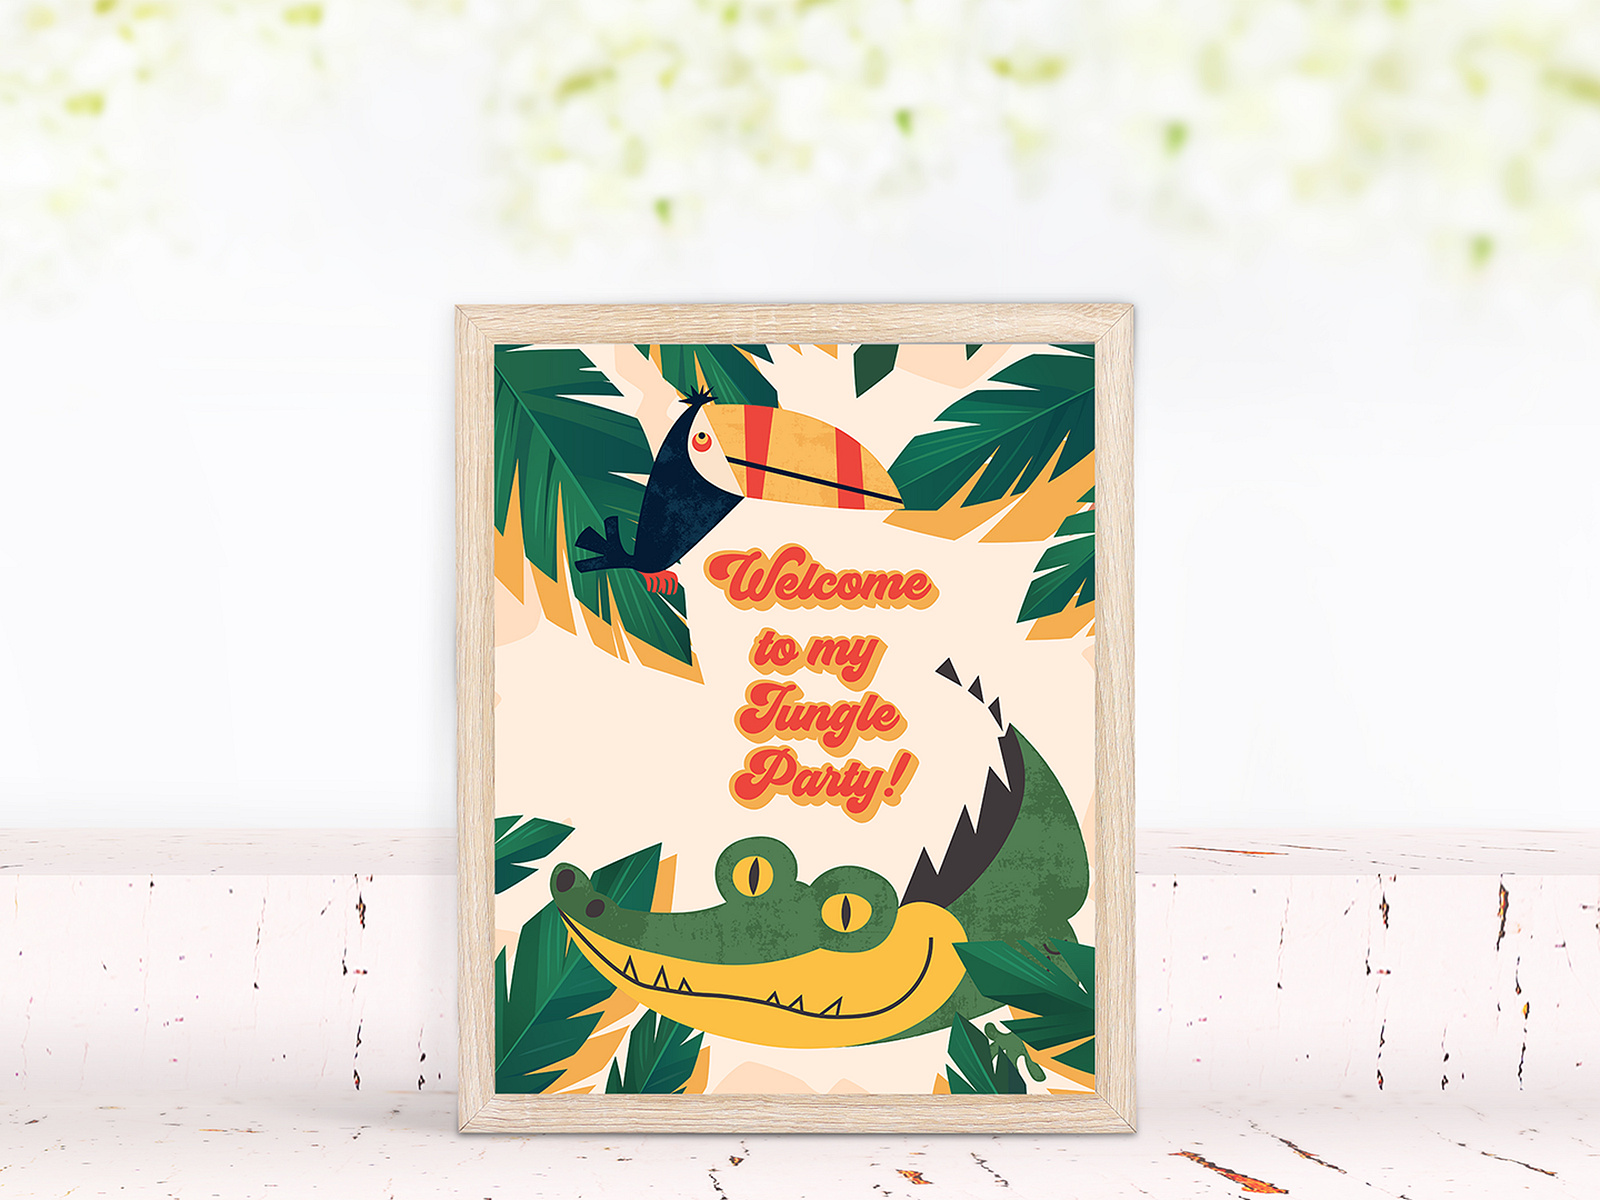 free-jungle-party-kit-for-kids-by-marie-dautel-on-dribbble